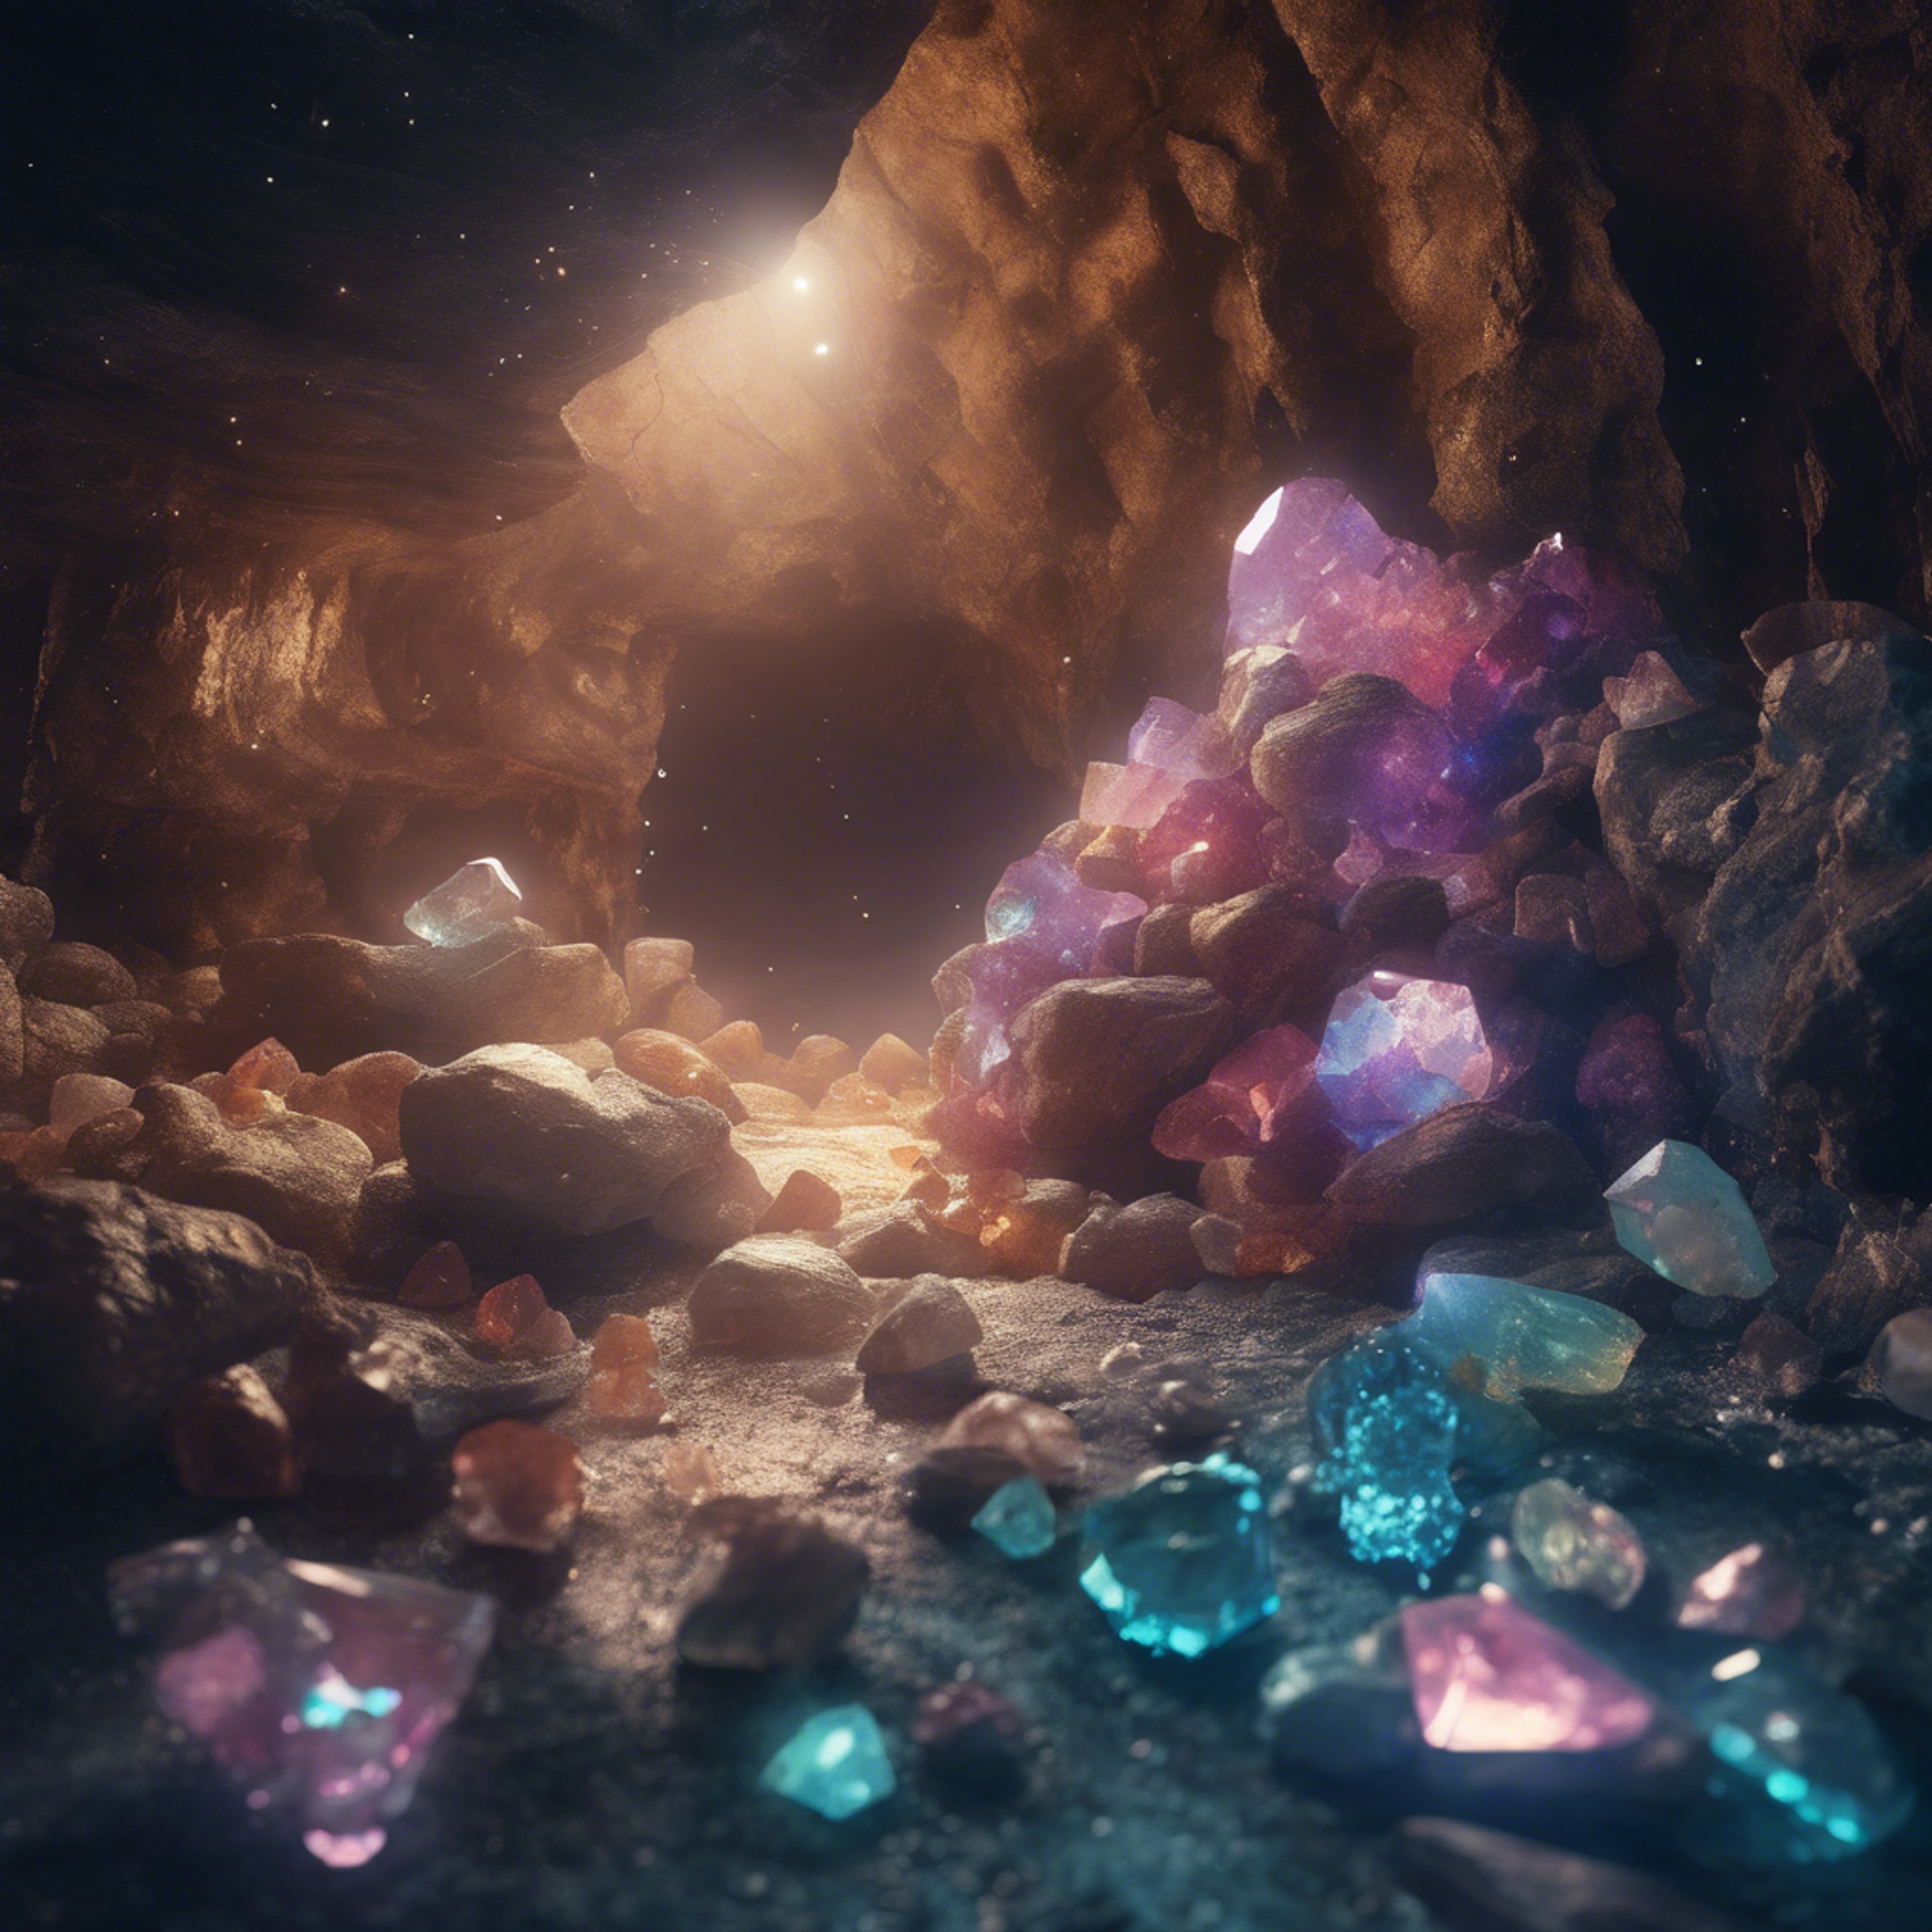 An echoing cavern with luminous minerals and gems, imagined in a dream. Wallpaper[305894c9d99c4647b6b0]